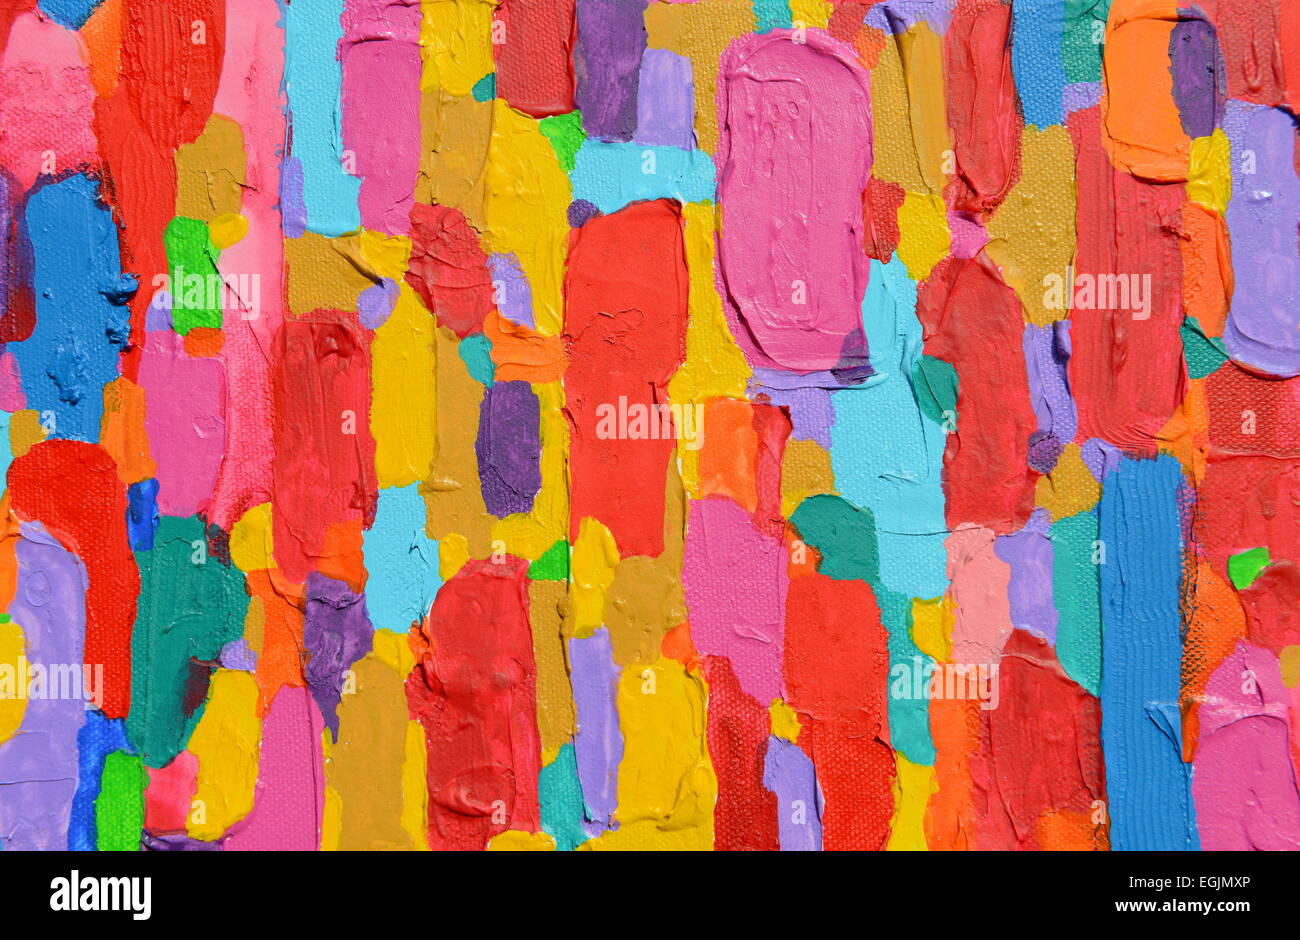 Texture, background and Colorful Image of an original Abstract Painting on Canvas. Stock Photo